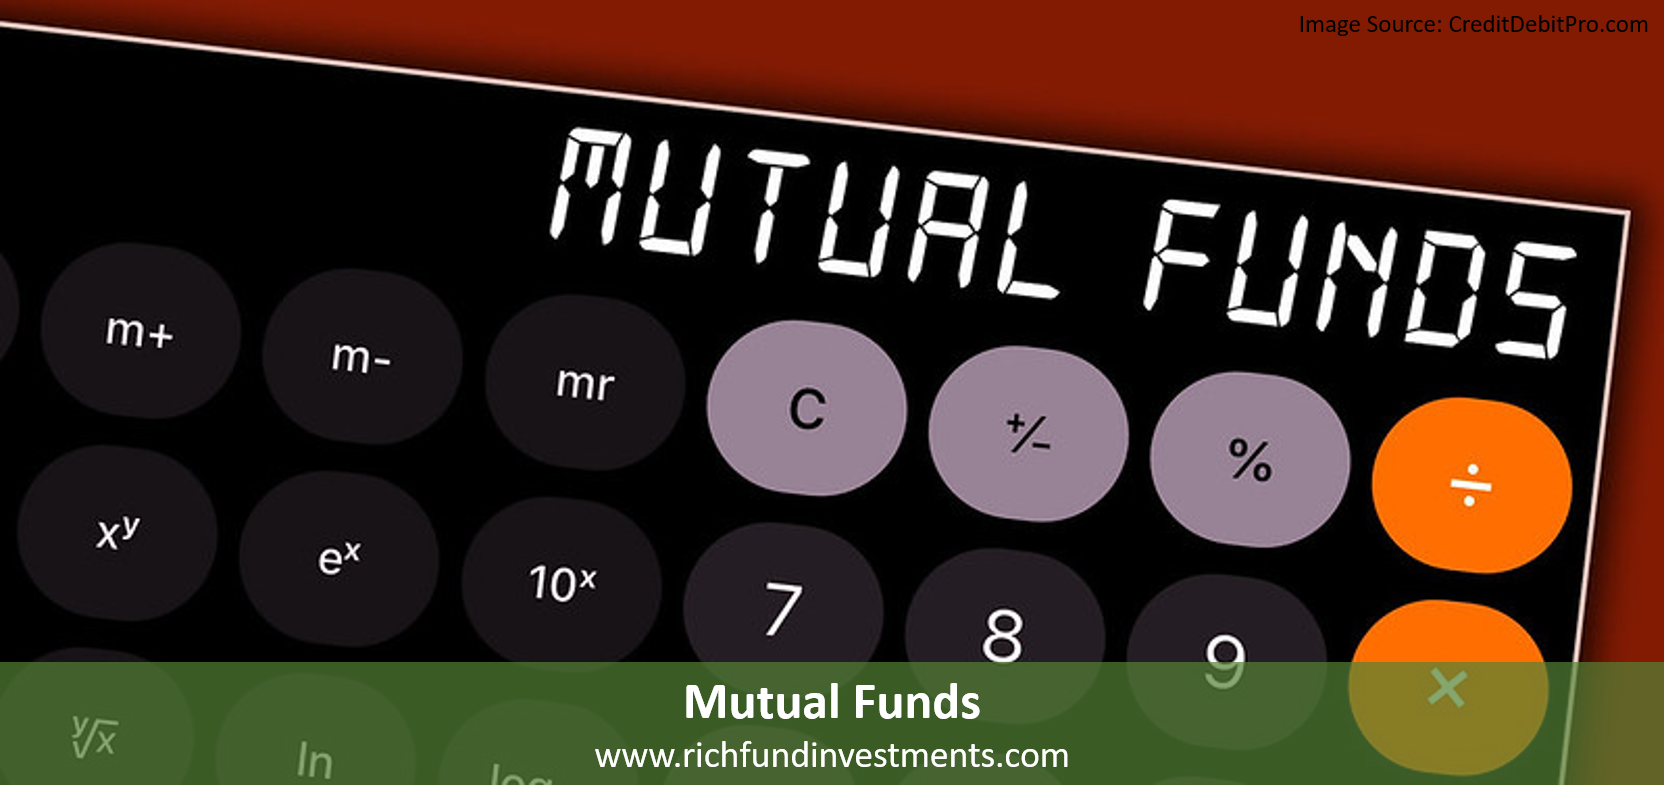 mutual funds-product-www.richfundinvestments.com